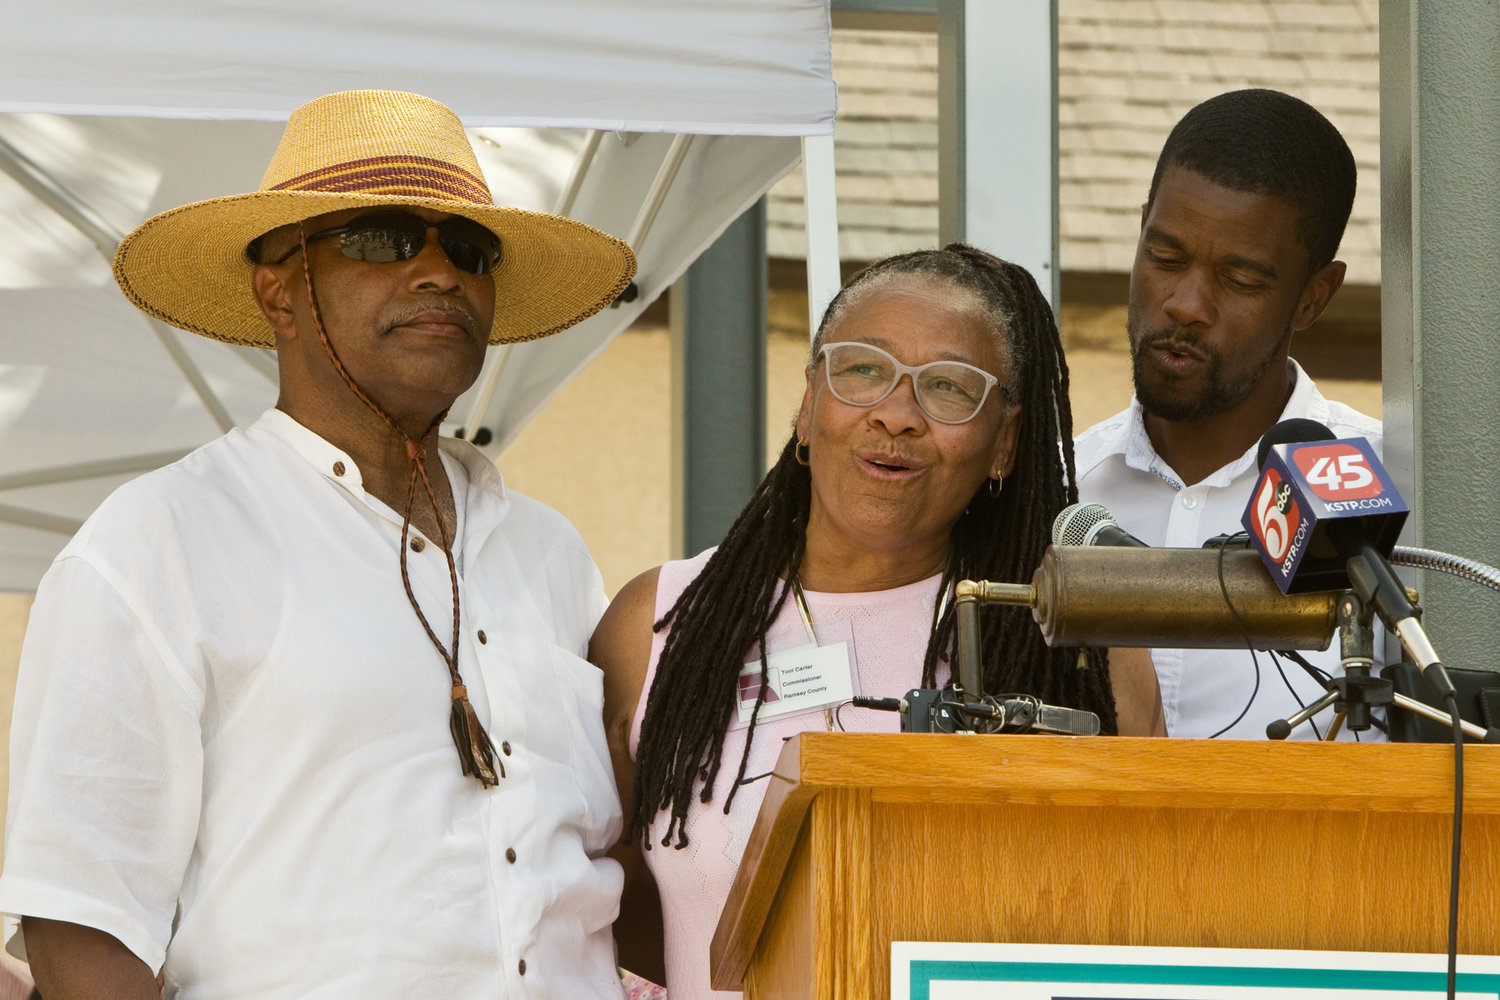 Ramsey County Commissioner Toni Carter (center), husband Melvin Carter Junior (left) and son St. Paul mayor Melvin Carter III (right) commemorated their family’s original Rondo home that was uprooted during the construction of I-94 by planting a tree during the Juneteenth Celebration at the Rondo Center of Diverse Expression at 315 Fisk St. (Photo by Margie O’Loughlin)